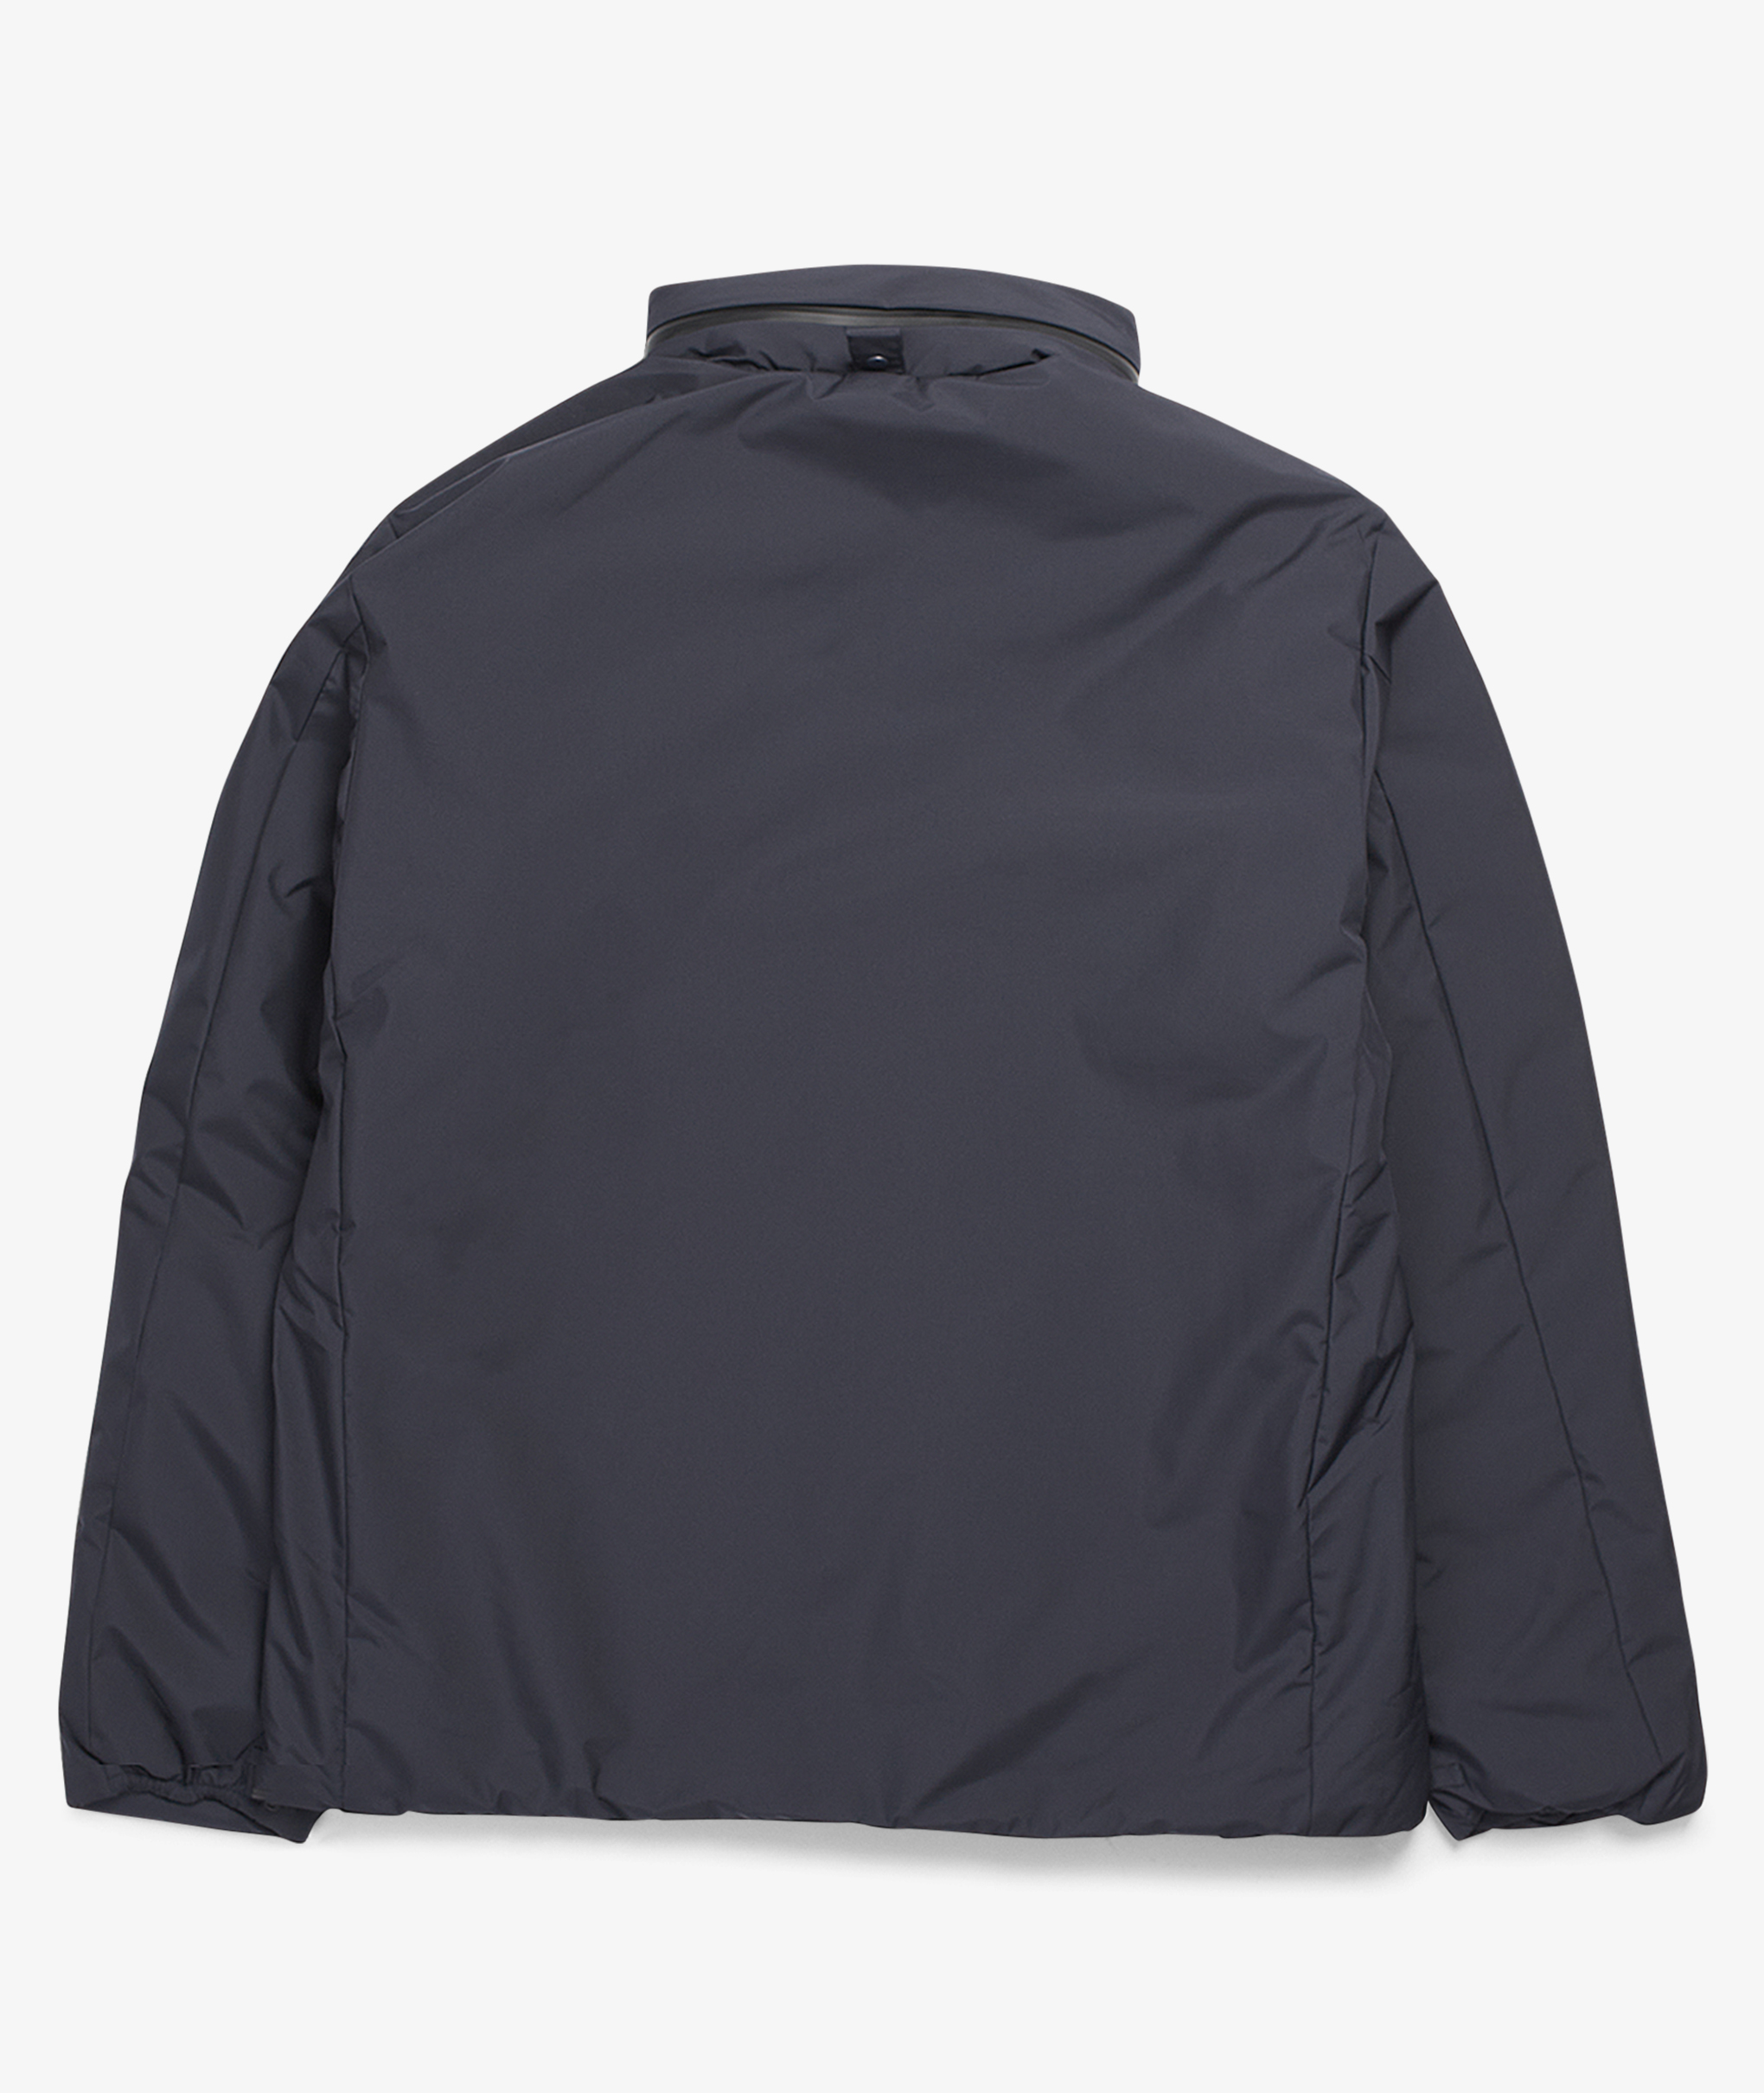 Norse Store | Shipping Worldwide - Norse Projects Pertex Shield 